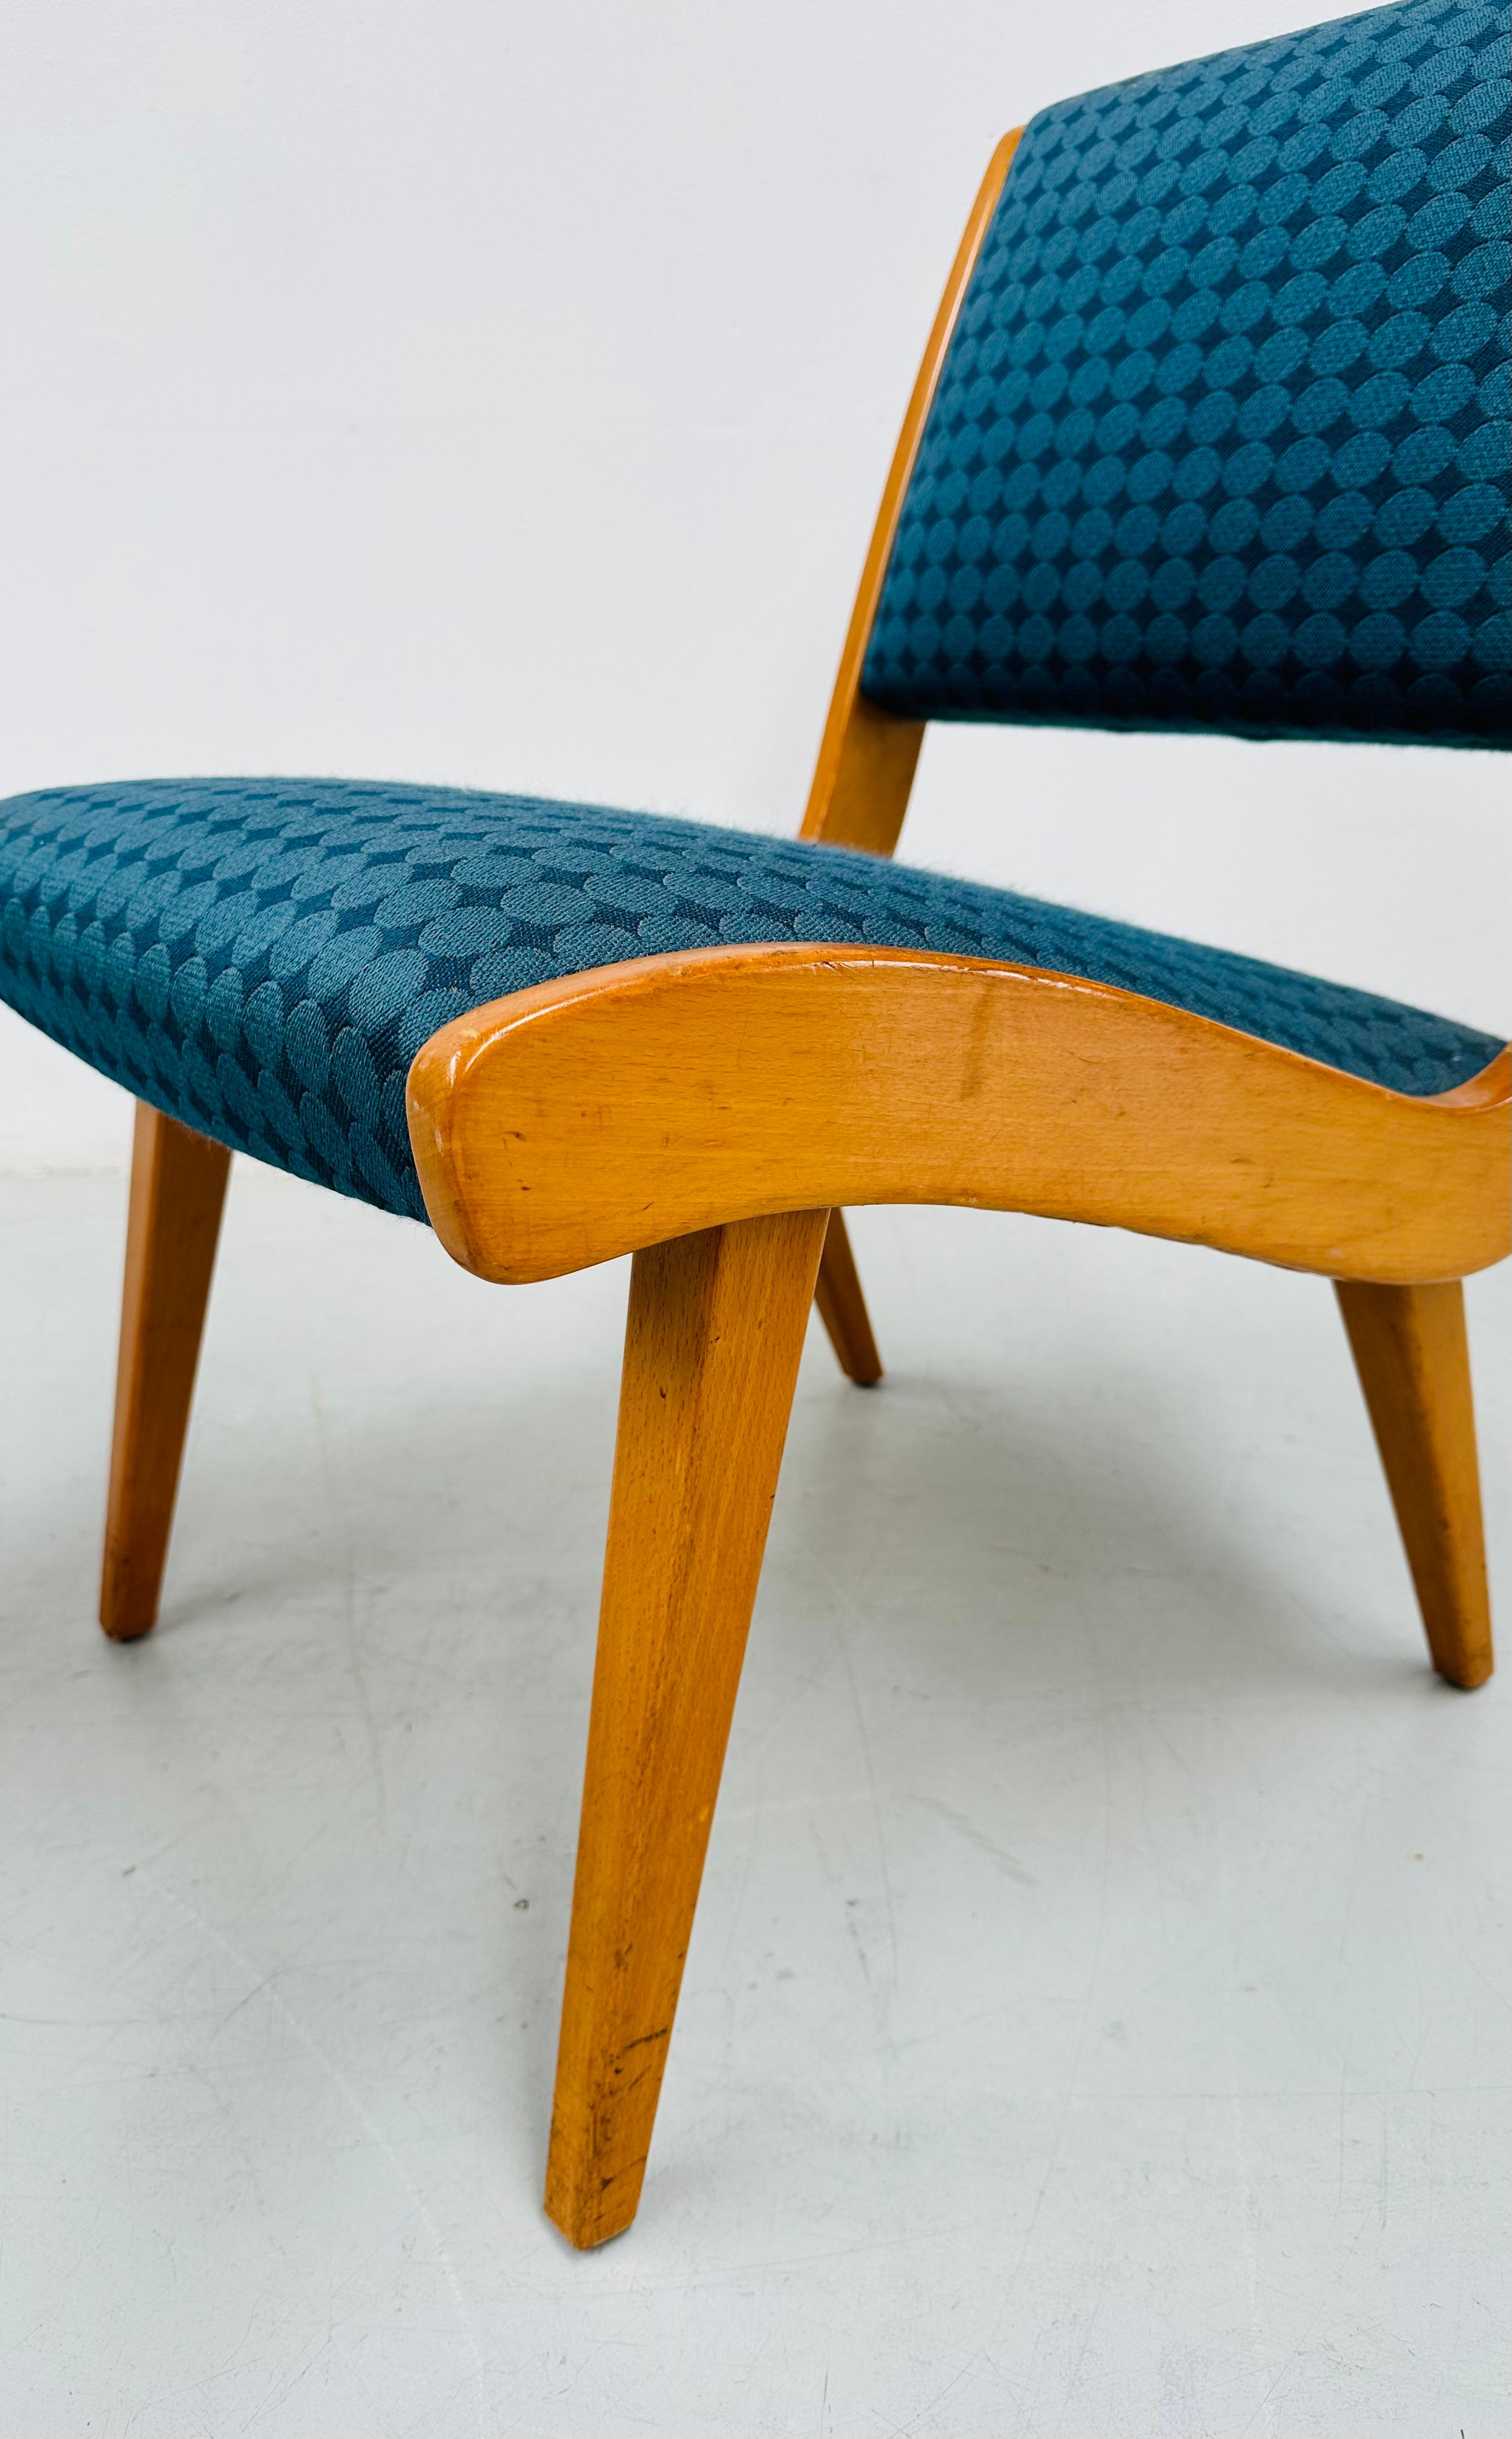 1950s Rare Set Vostra Chairs Numbered & Original Fabric by Jens Risom for Knoll. en vente 11